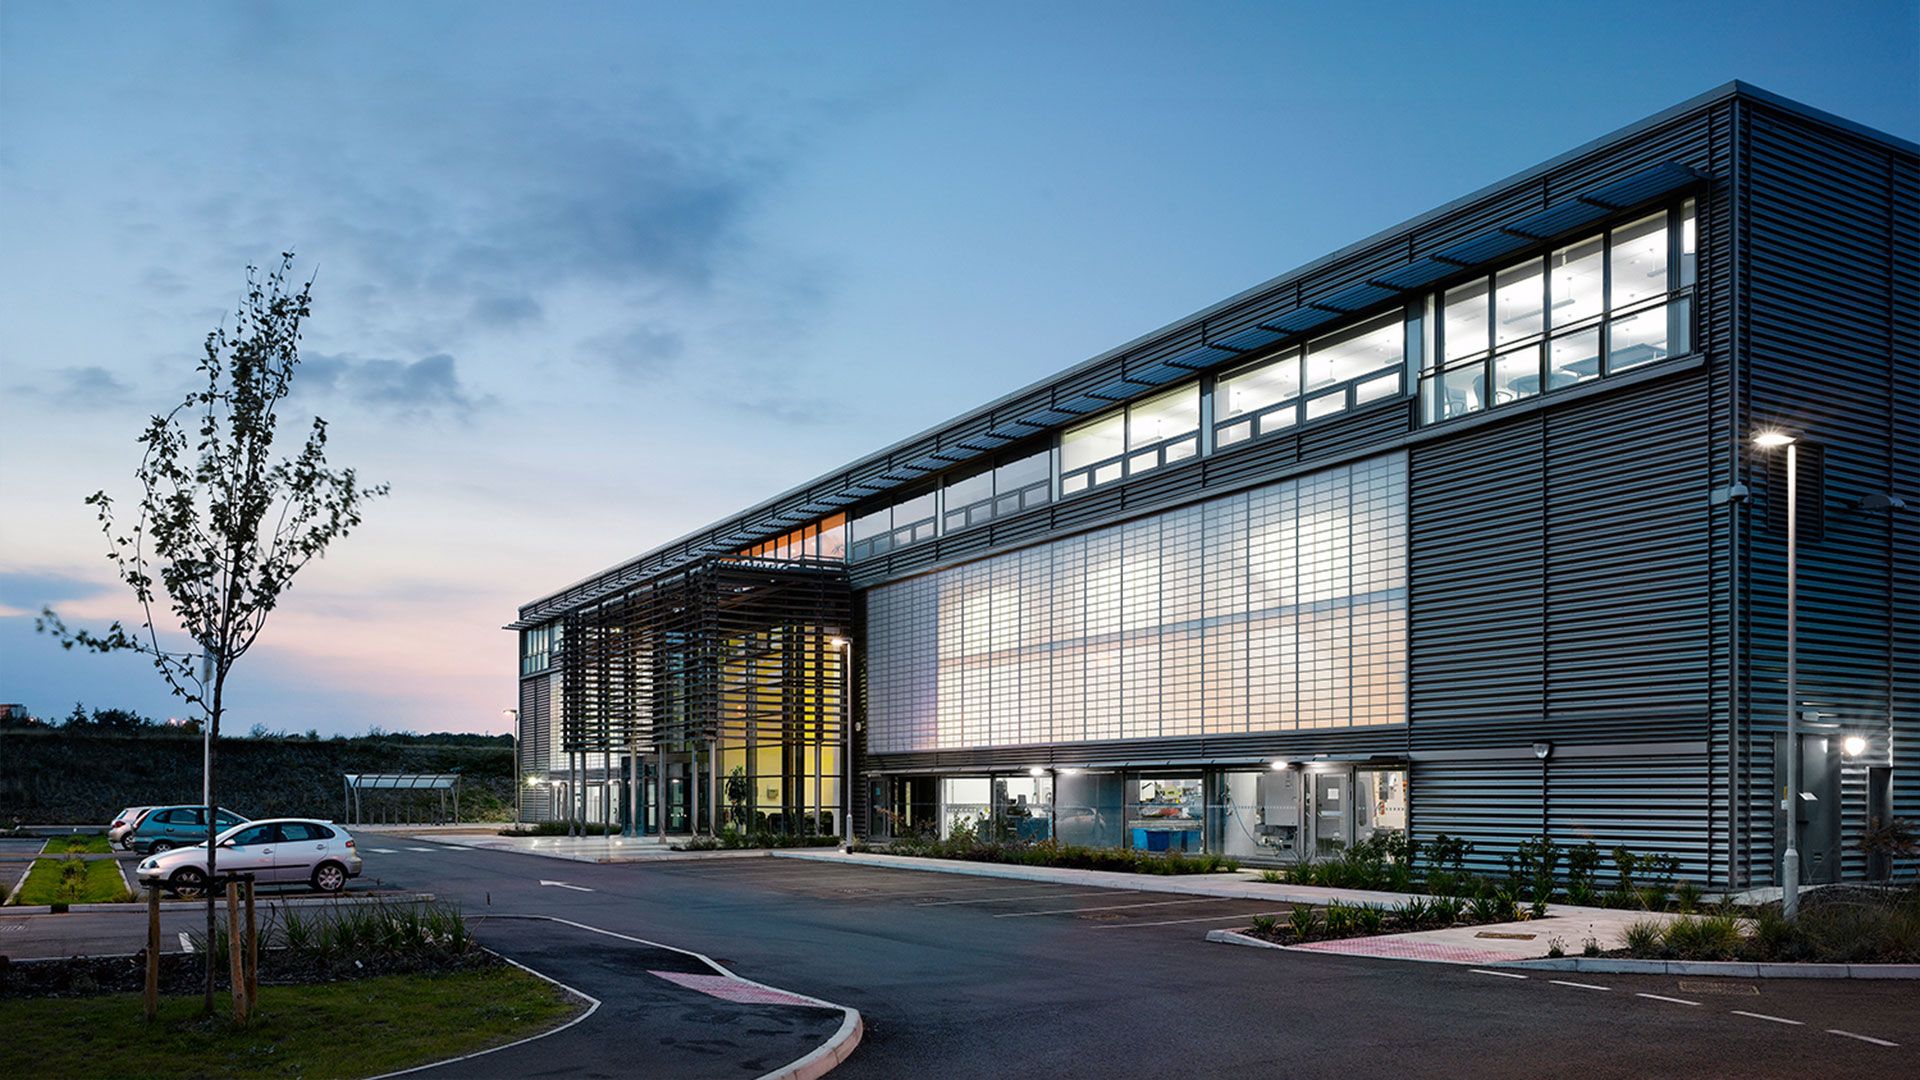 Advanced Manufacturing Research Centre (AMRC)